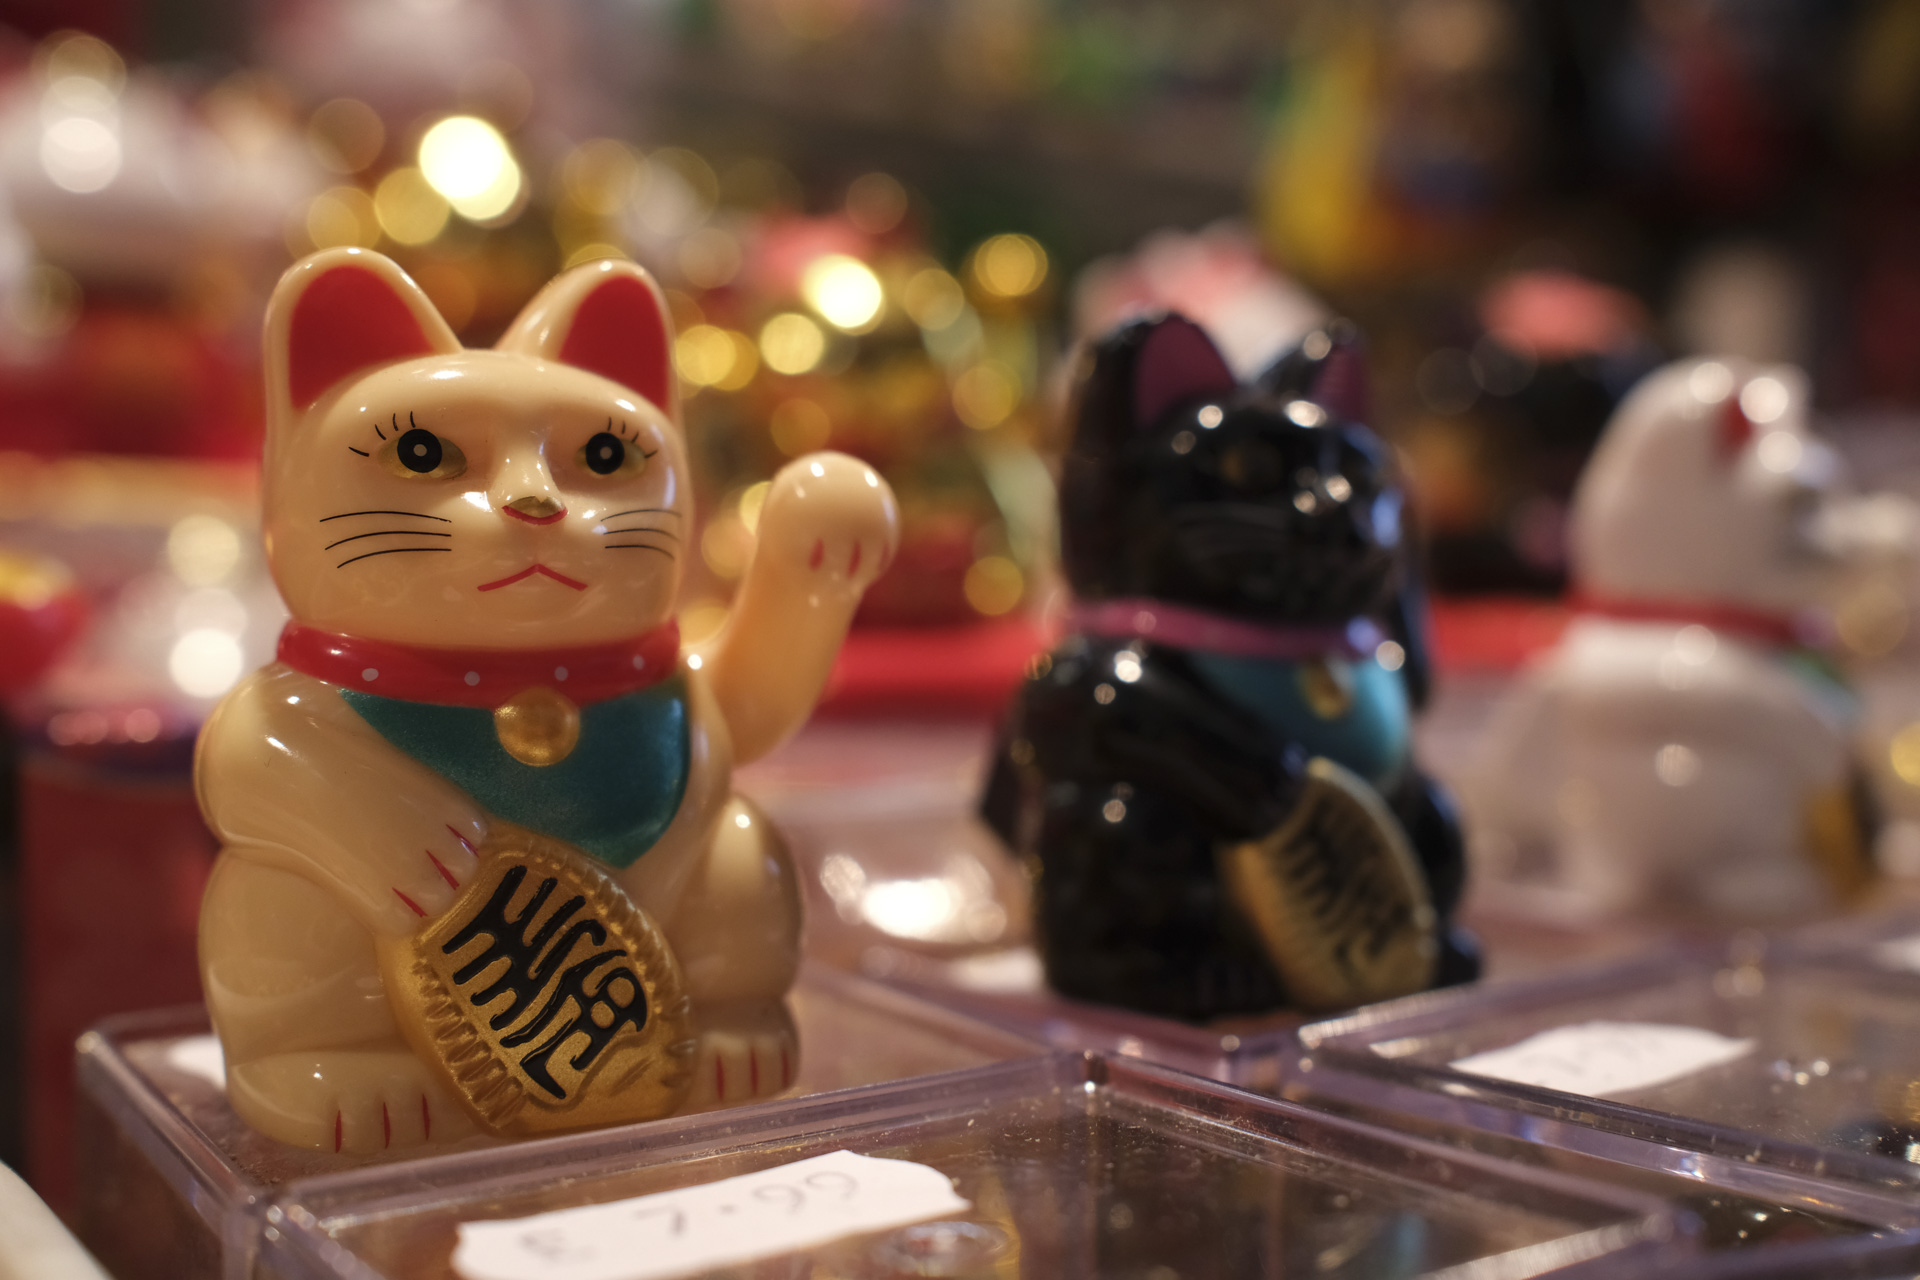 Chinese lucky cat photo taken at f/4 using the Fujifilm X100VI